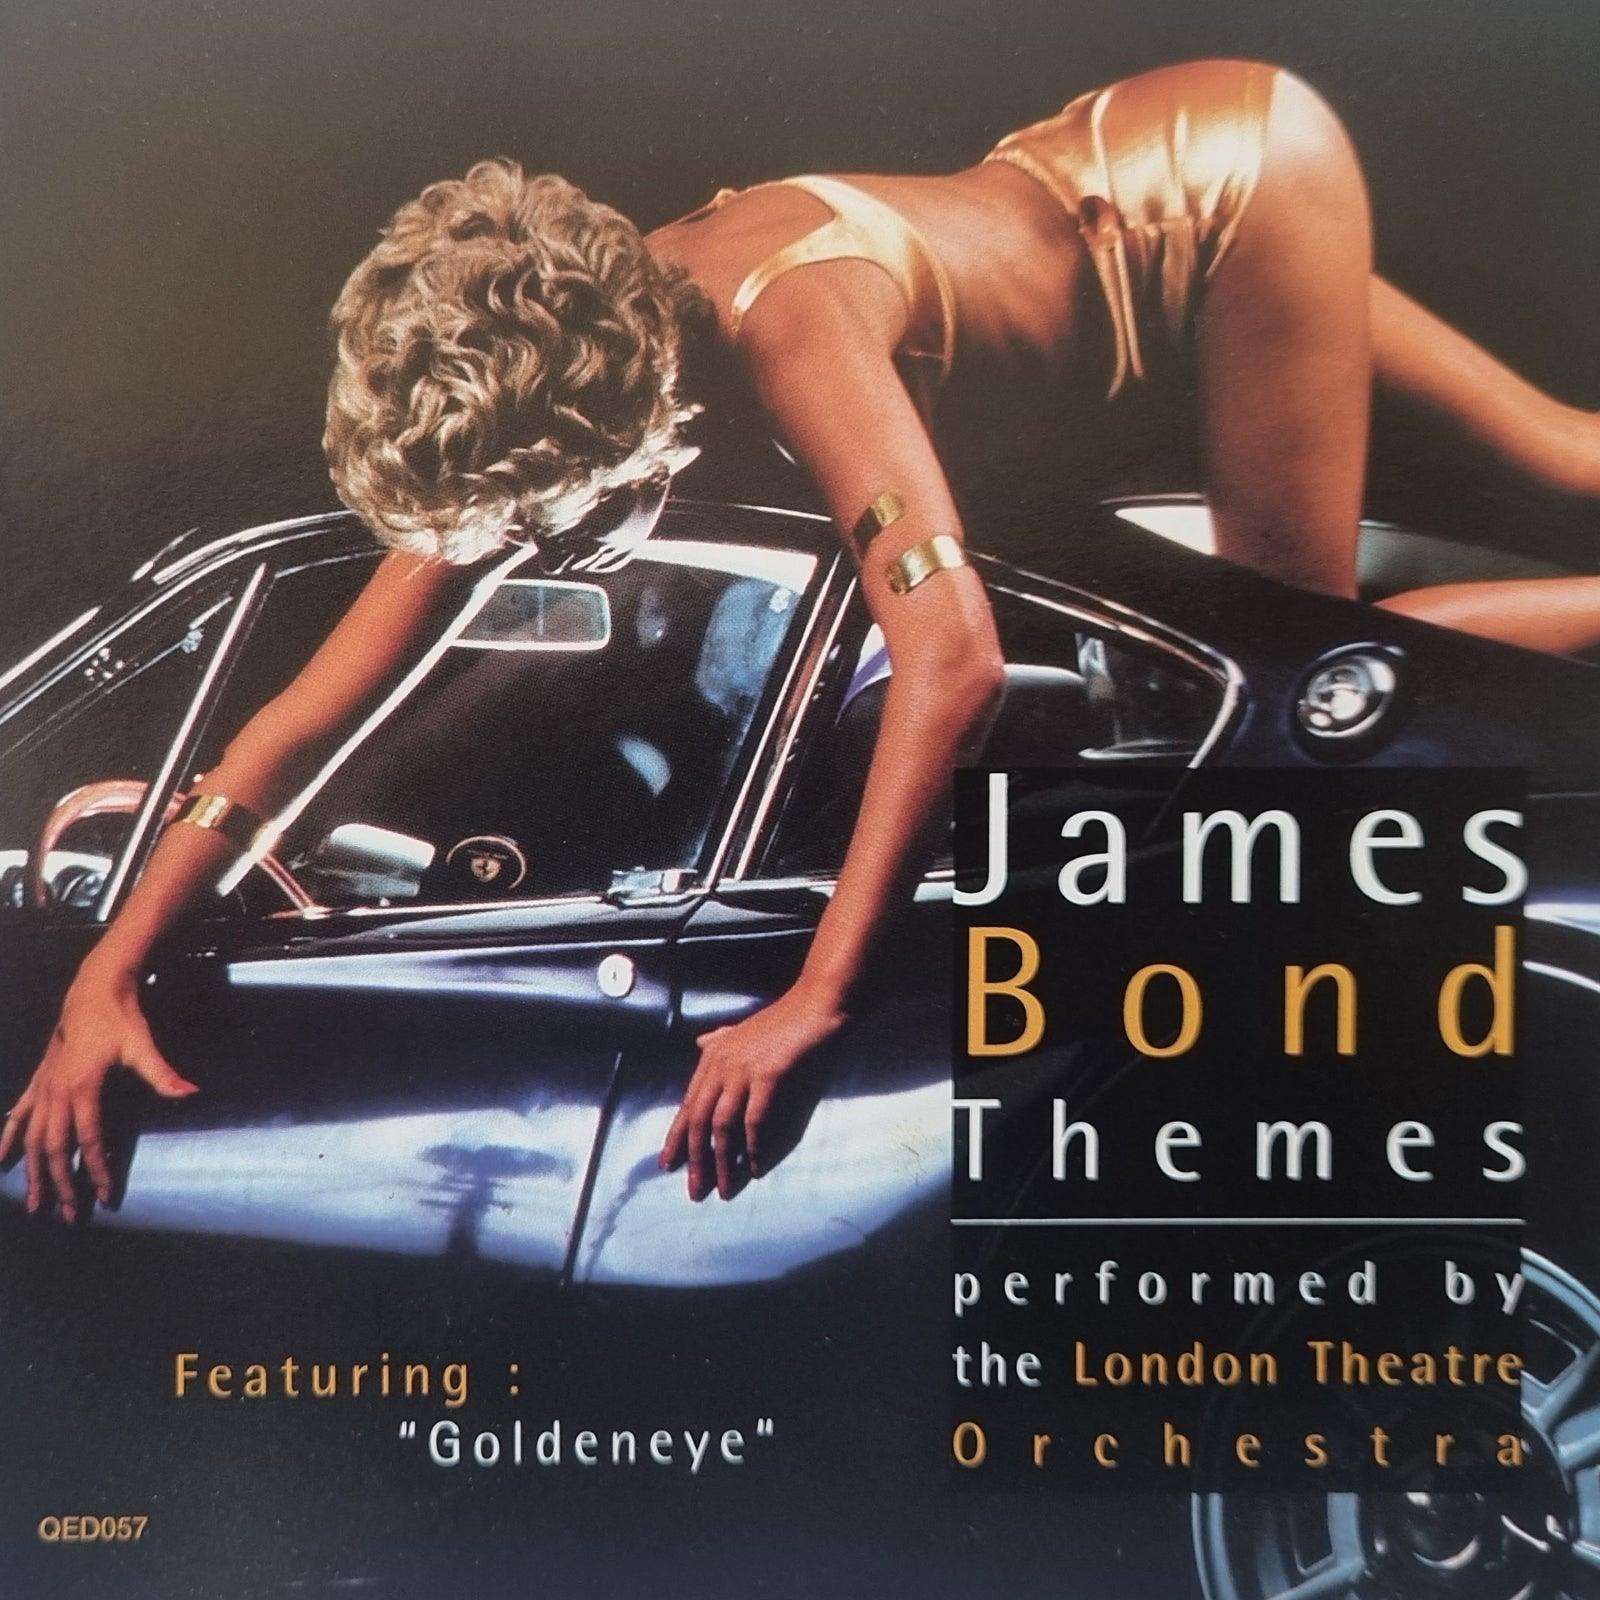 James Bond Themes - Performed by the London Theatre Orchestra (CD)